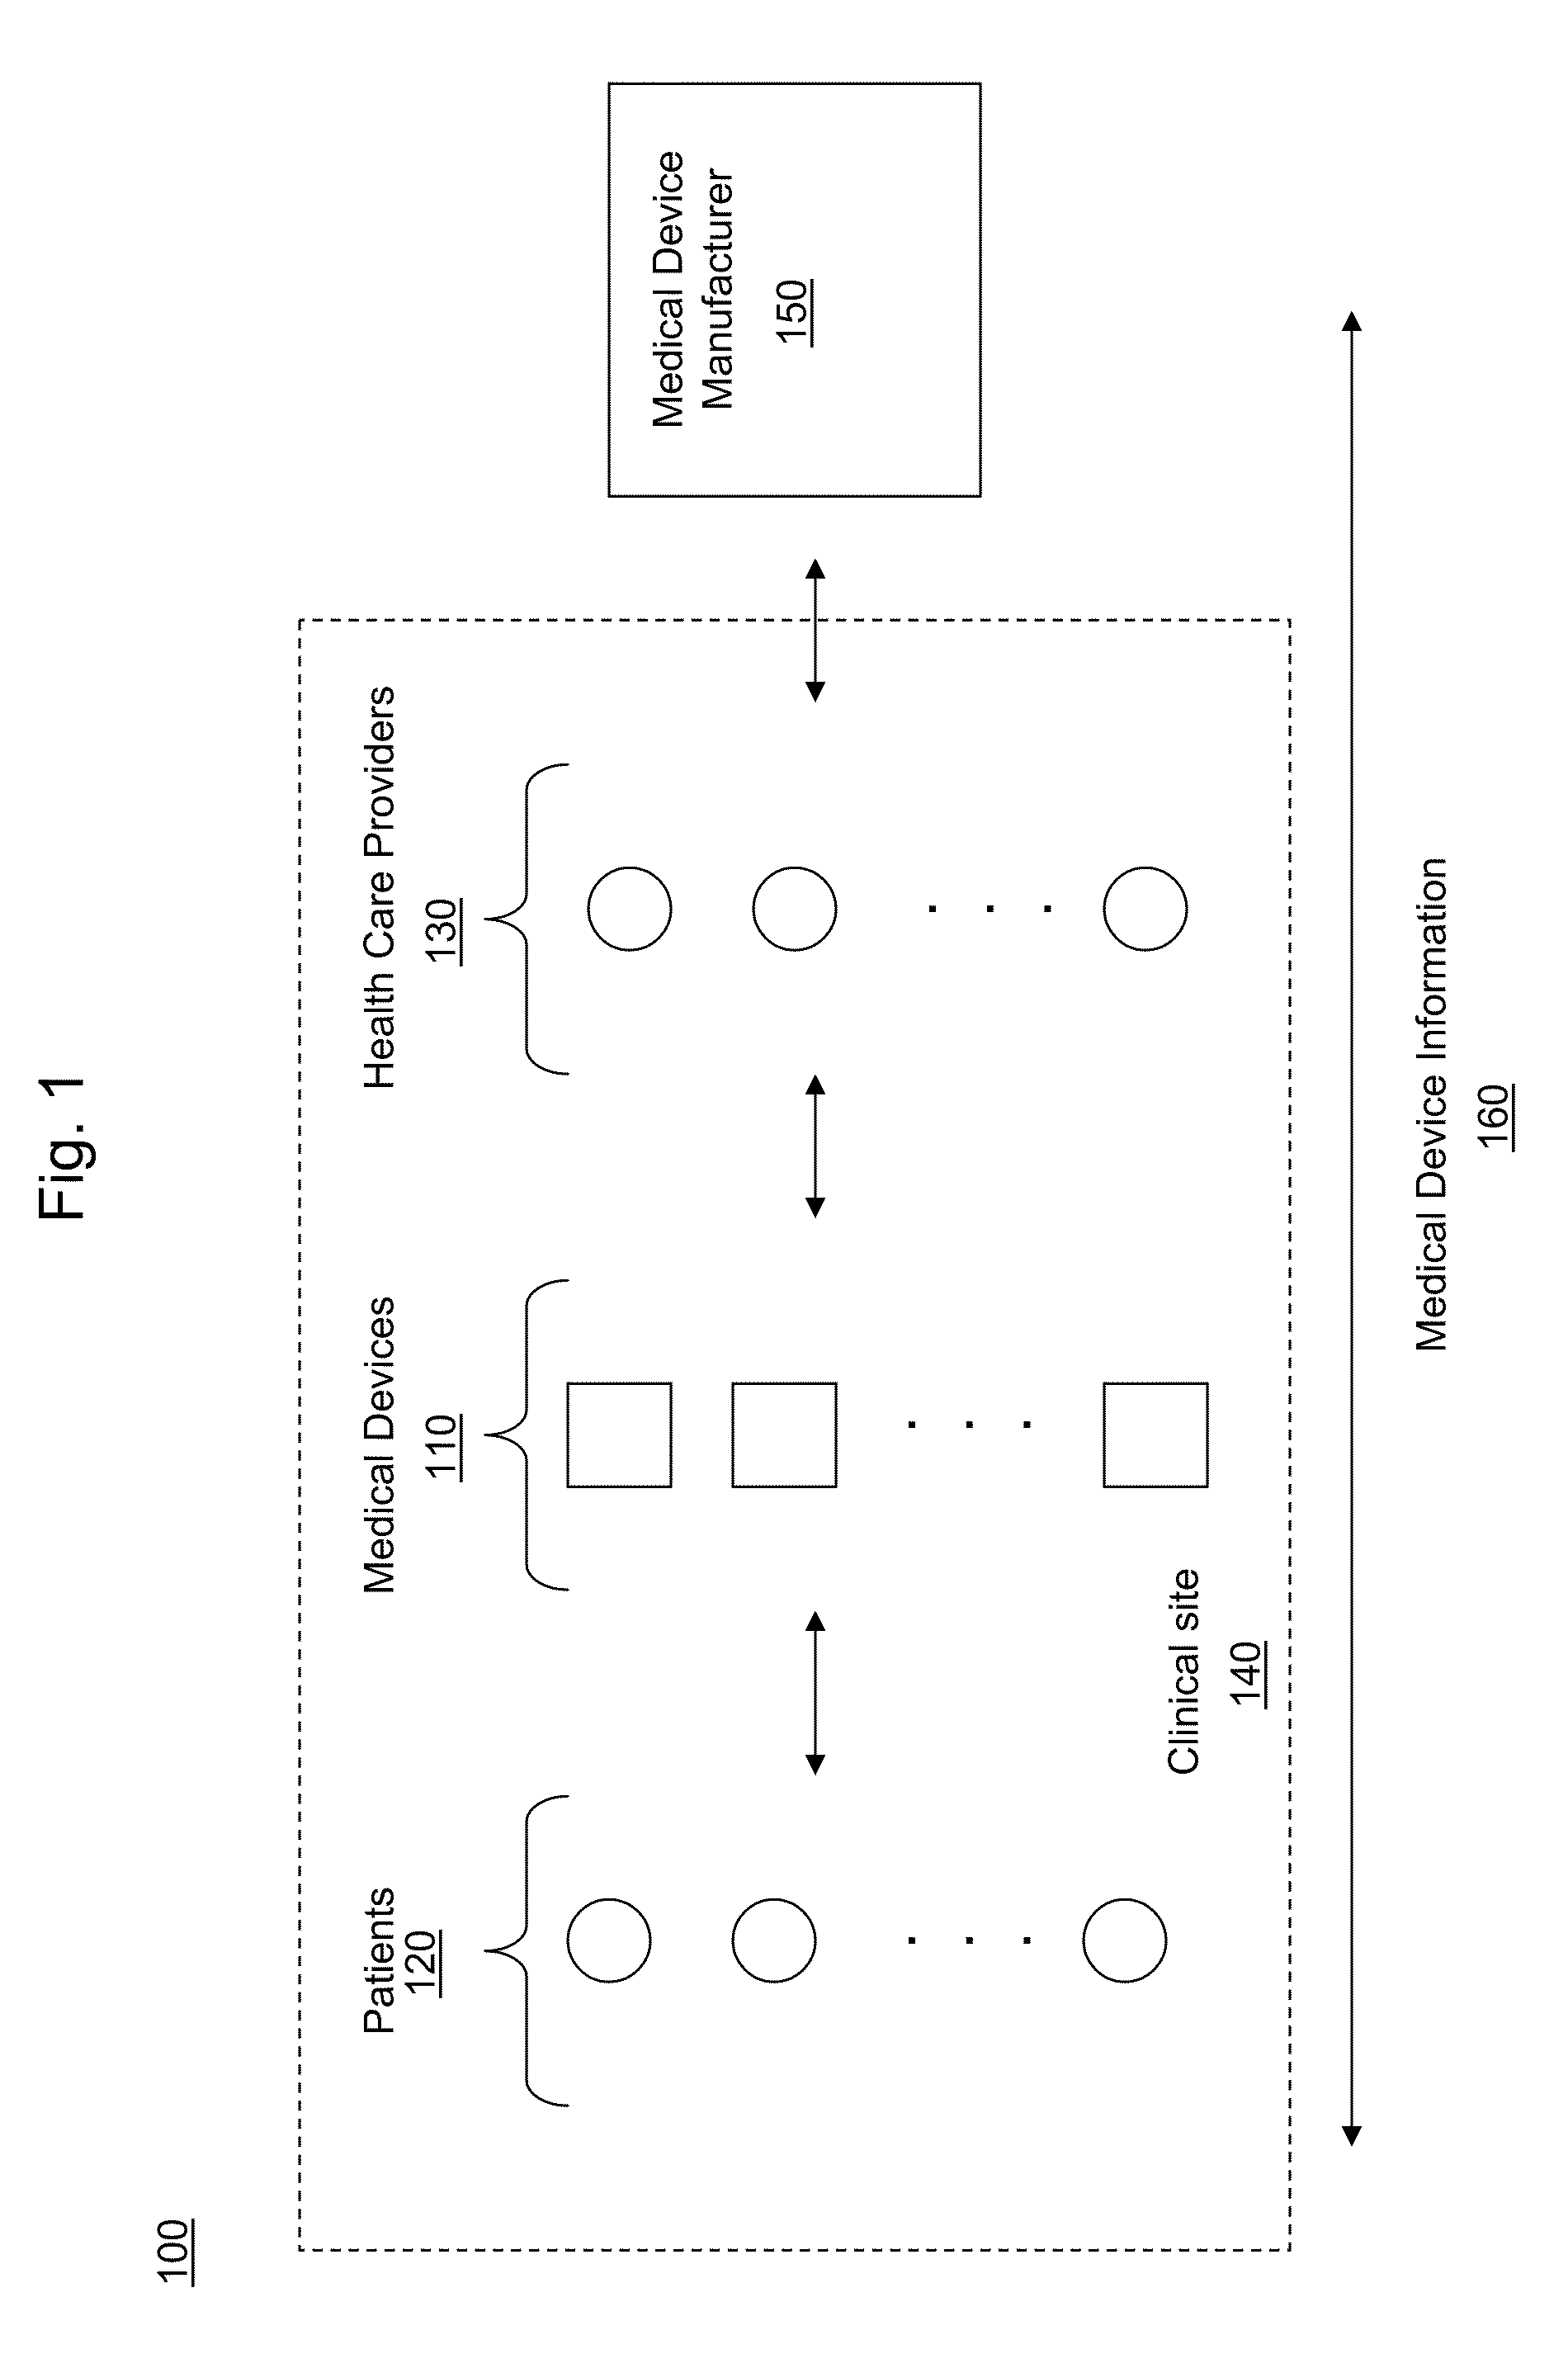 Integrated health care system for managing medical device information